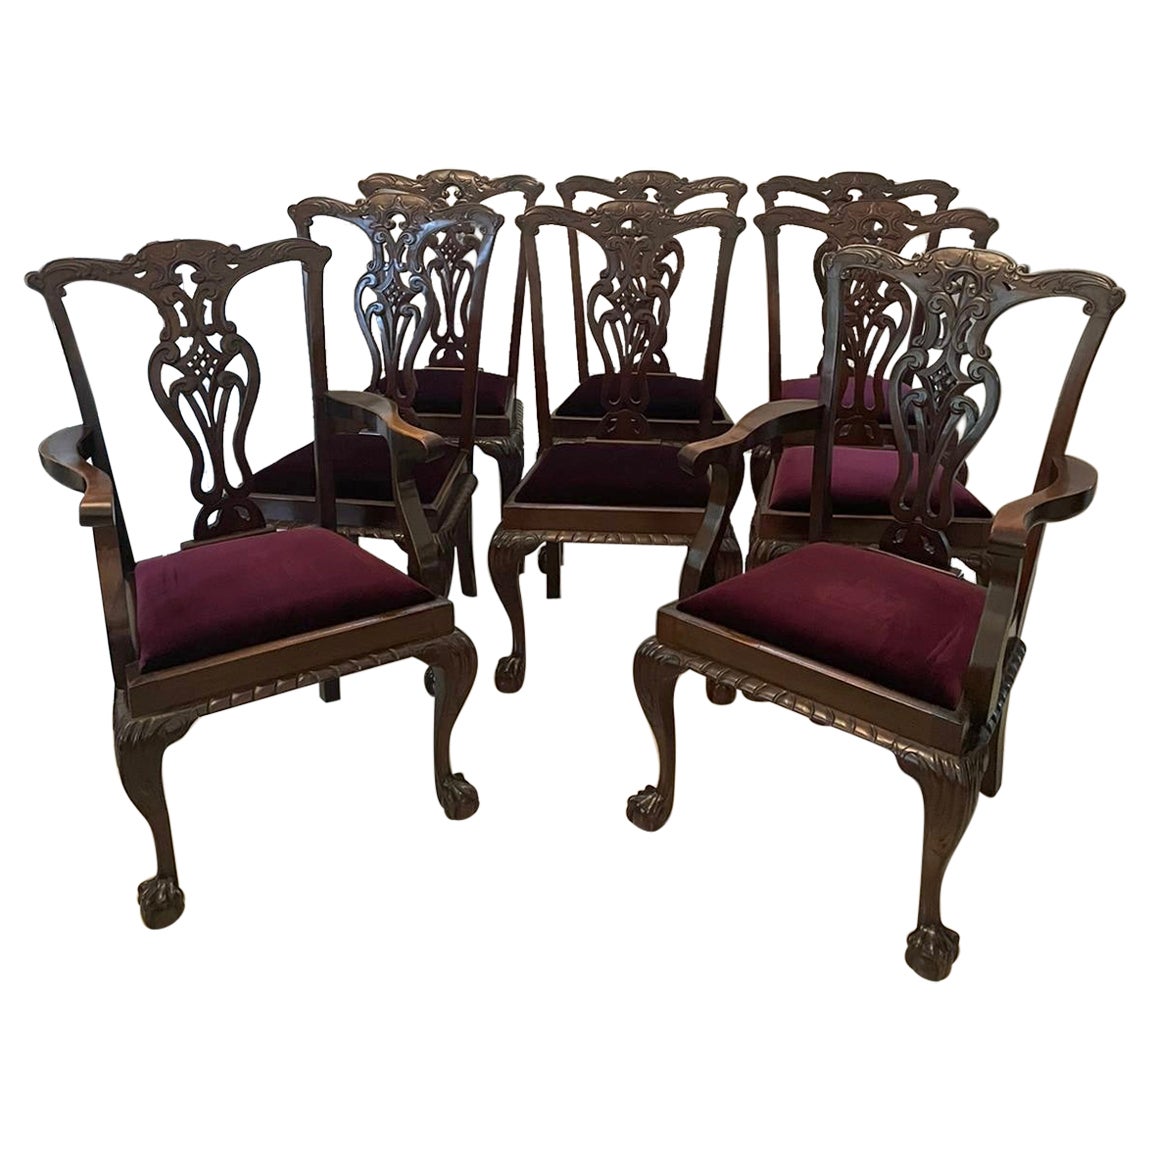 Set of Eight Antique Victorian Quality Carved Mahogany Dining Chairs